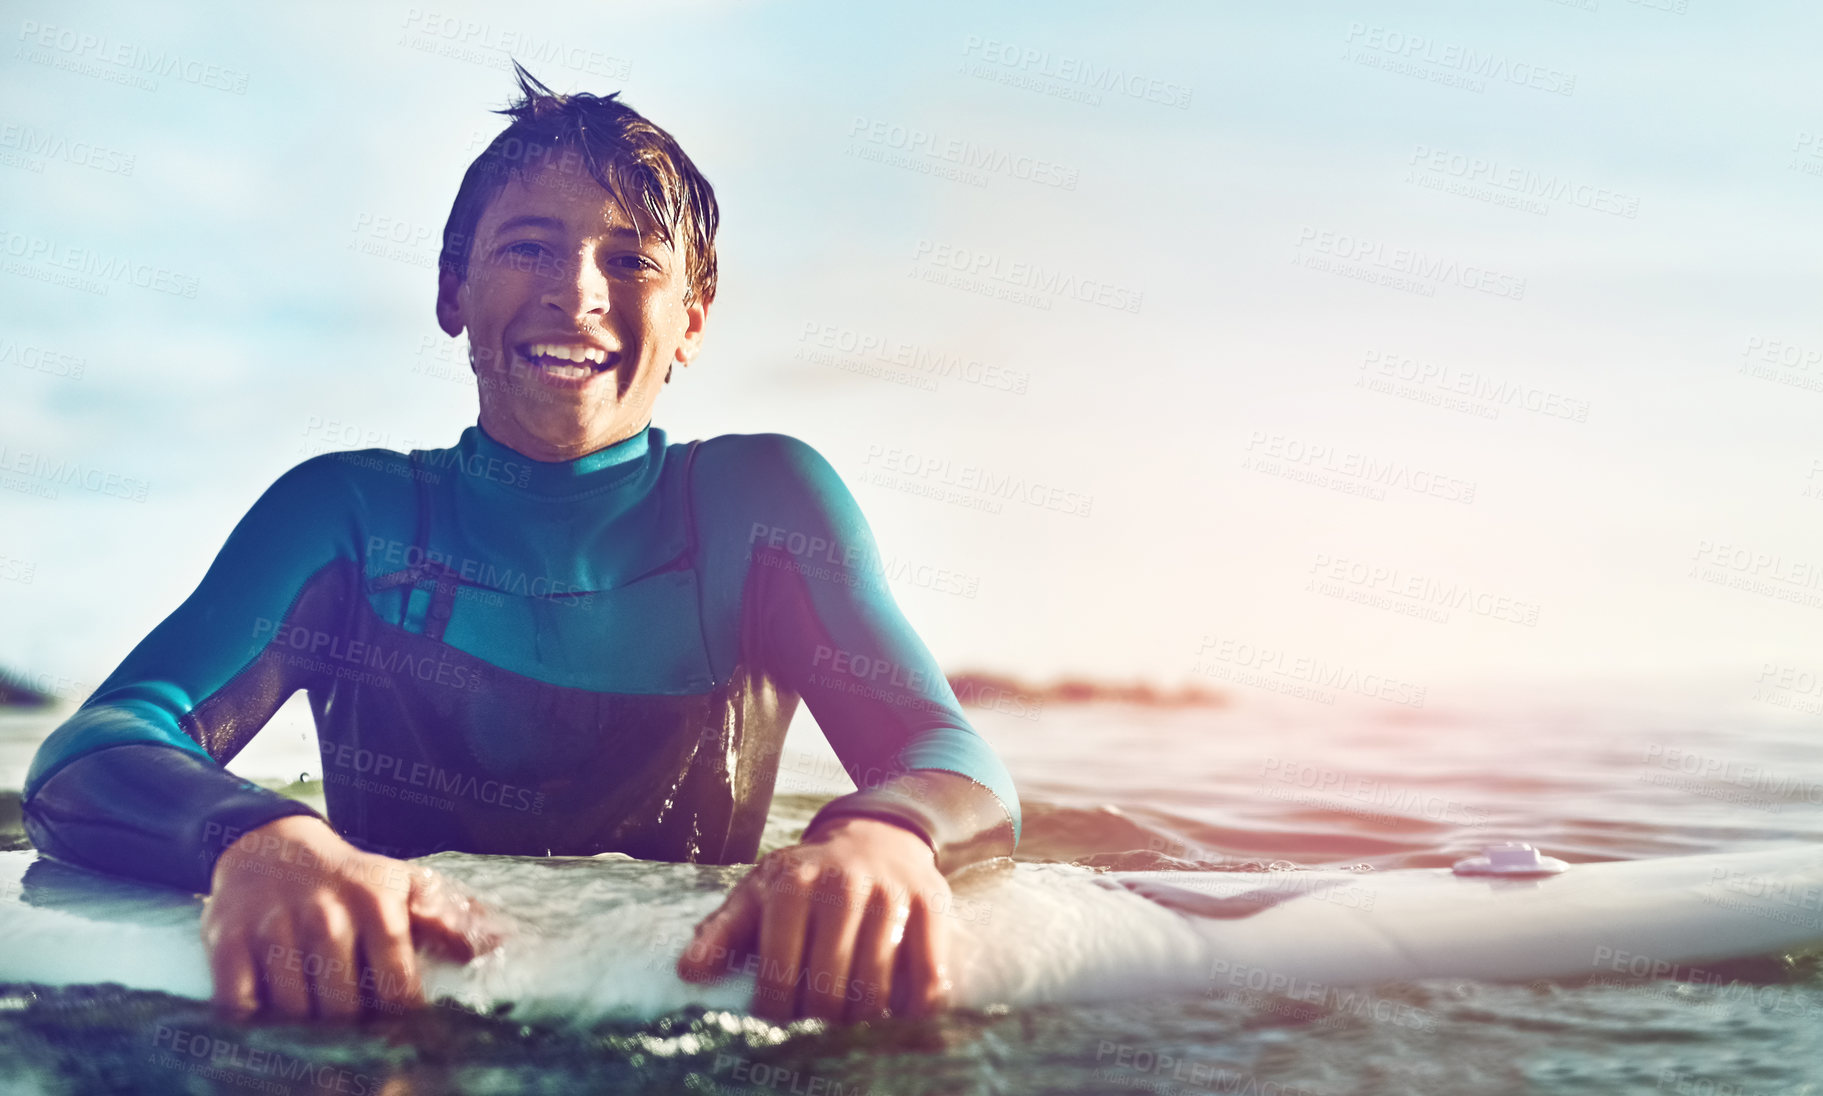 Buy stock photo Shot of a young boy out surfing